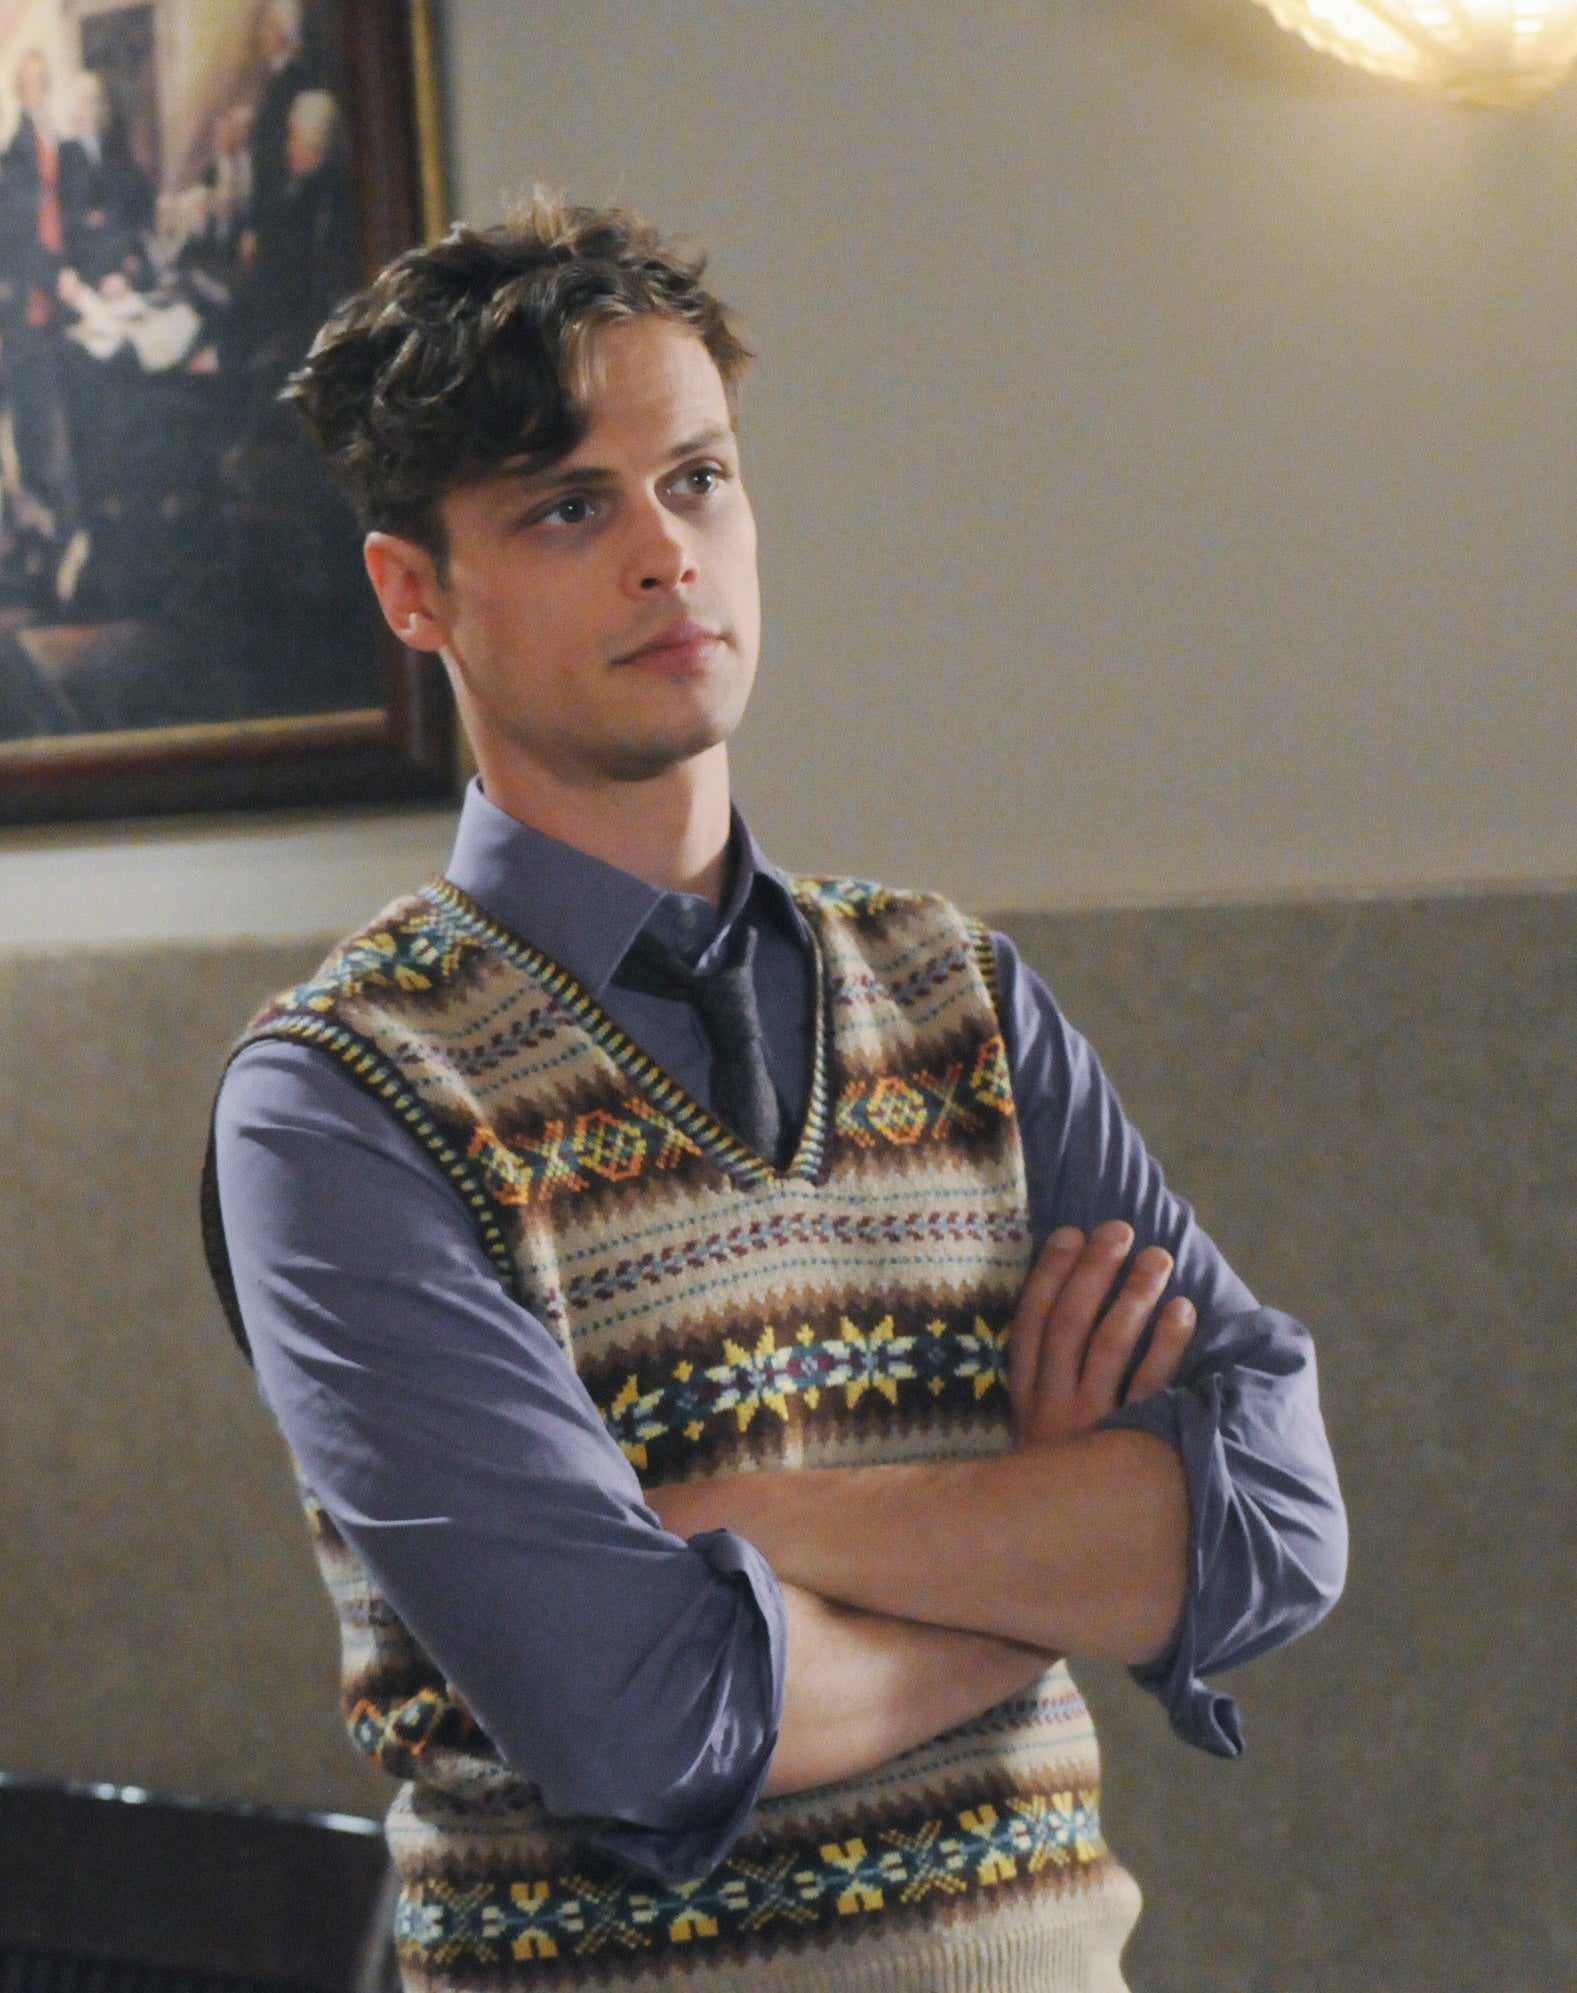 Reid wearing a sweater vest with his arms crossed